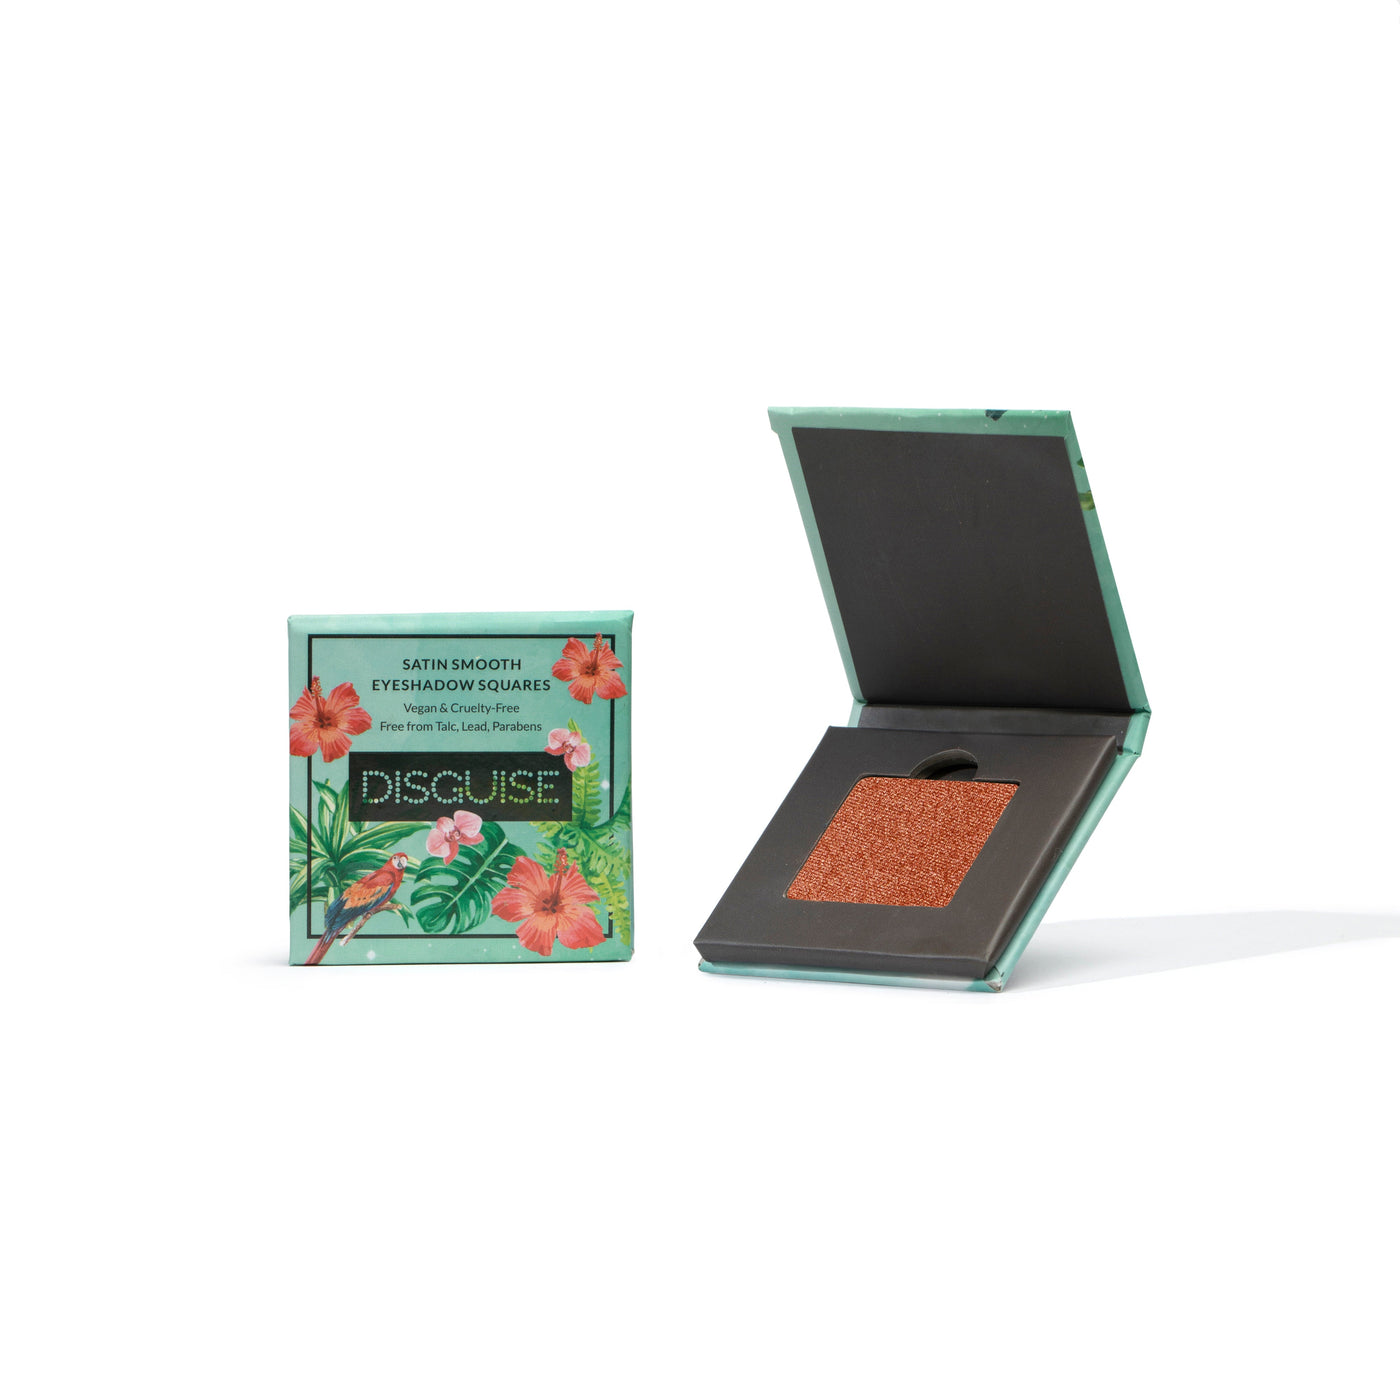 Satin Copper Lava 205 - Eyeshadow, NO TALC | INTENSE COLOR | WITH SOOTHING PLANT OILS | ULTRA-SMOOTH | 4.5 gm